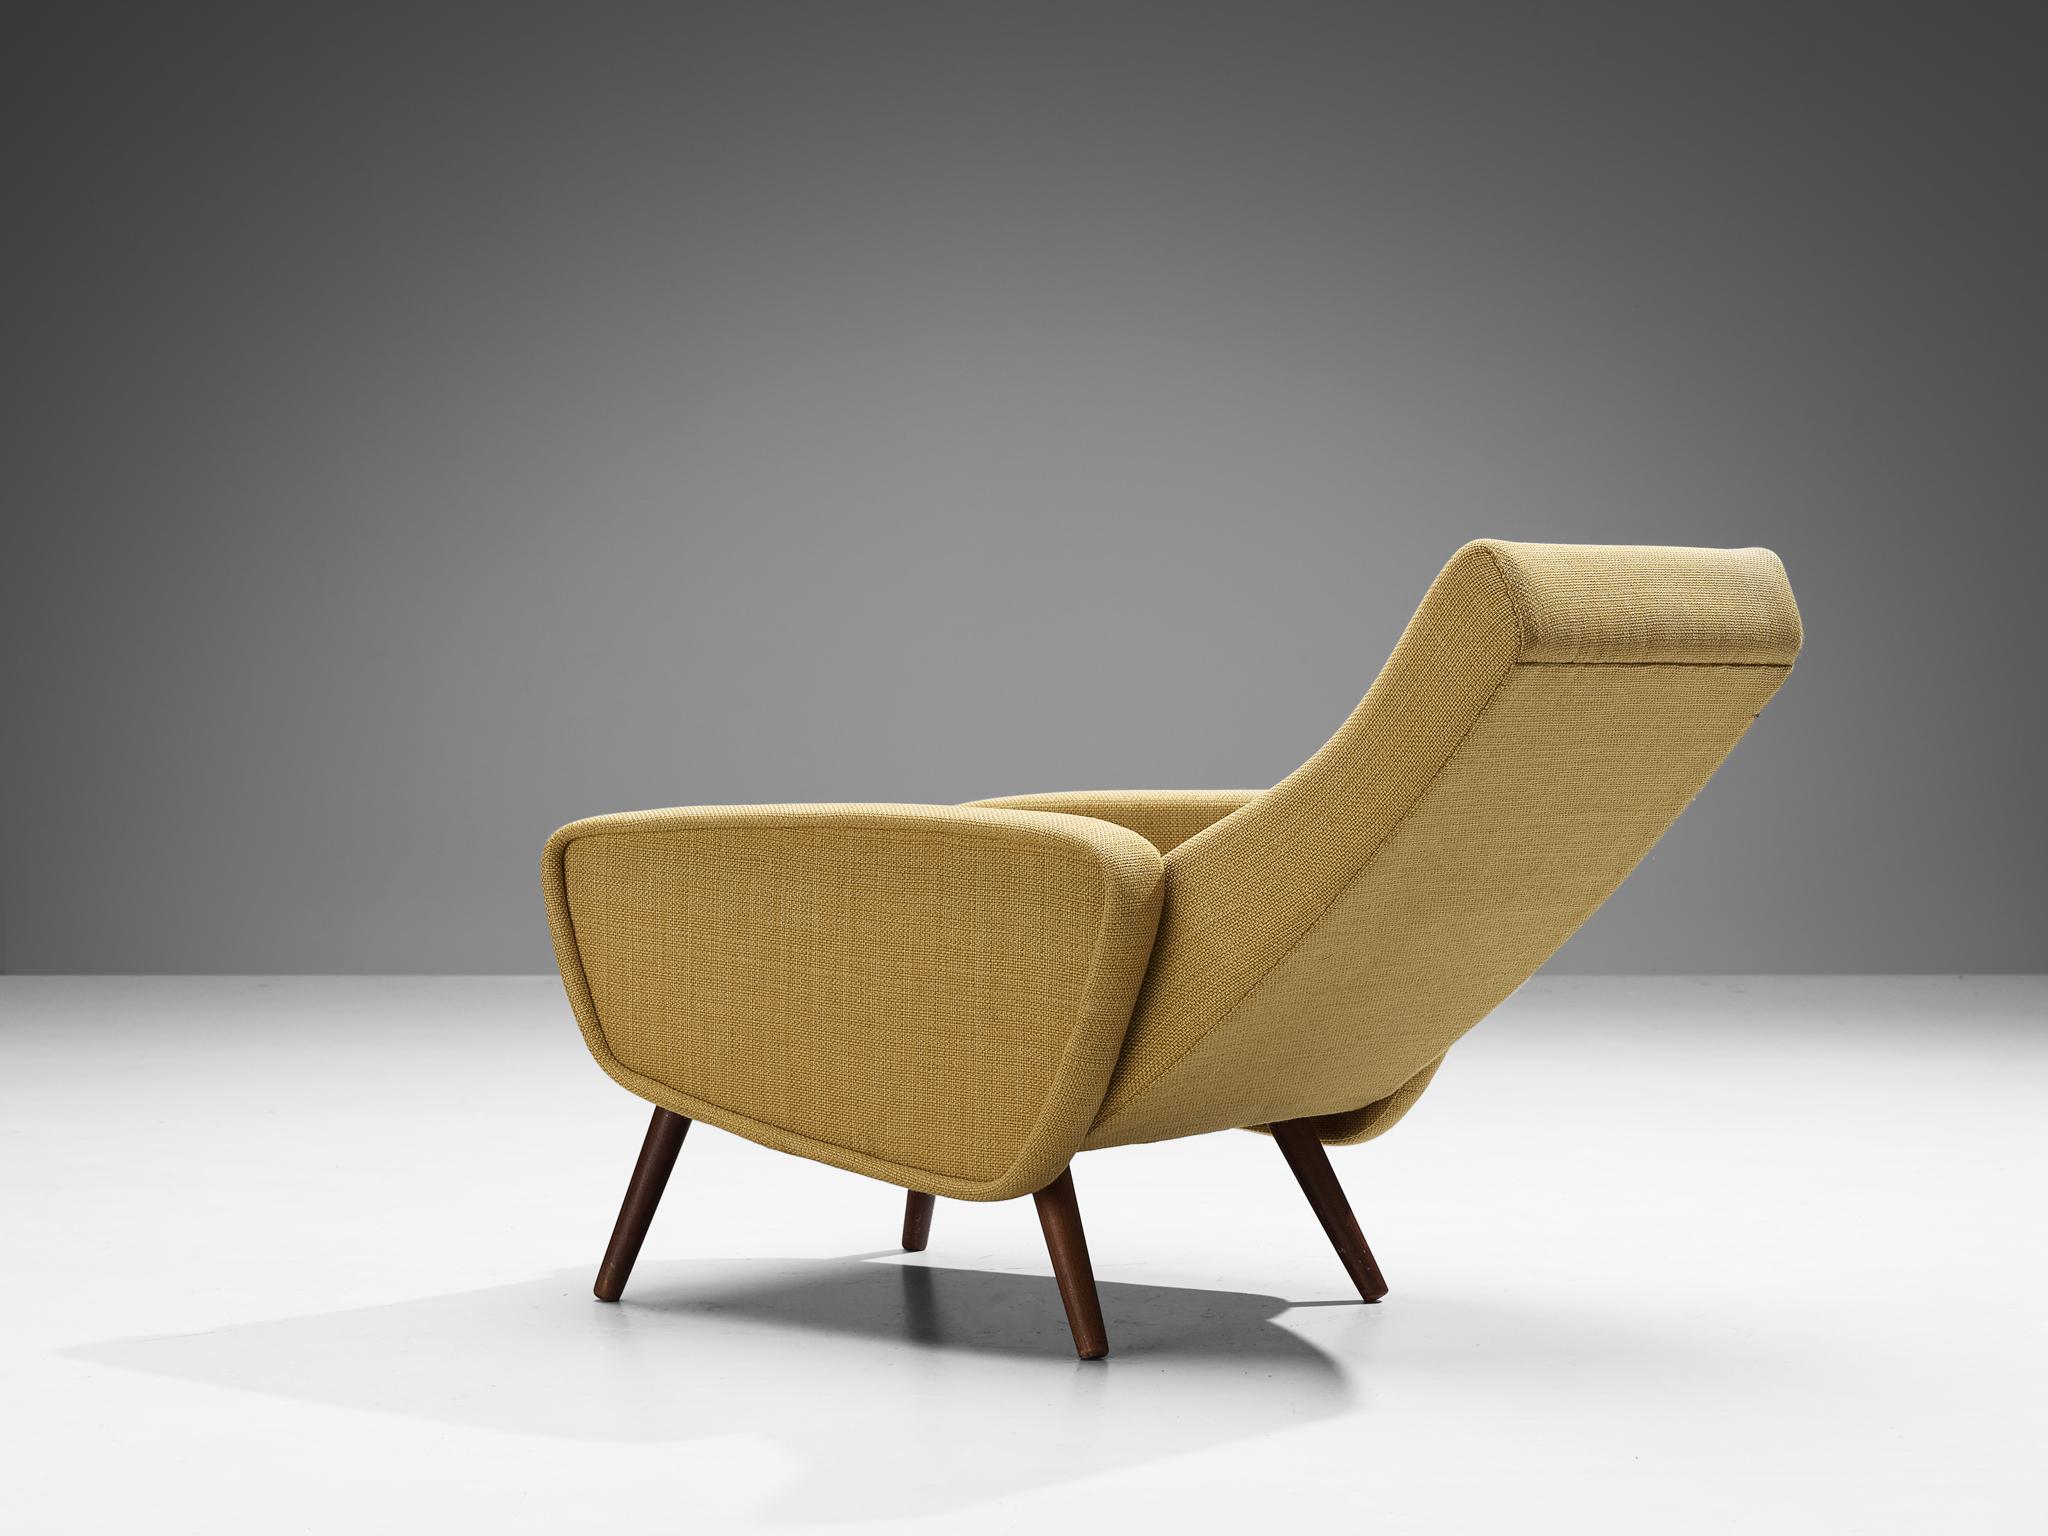 Fabric Italian Midcentury Lounge Chair in Mustard Yellow Upholstery For Sale